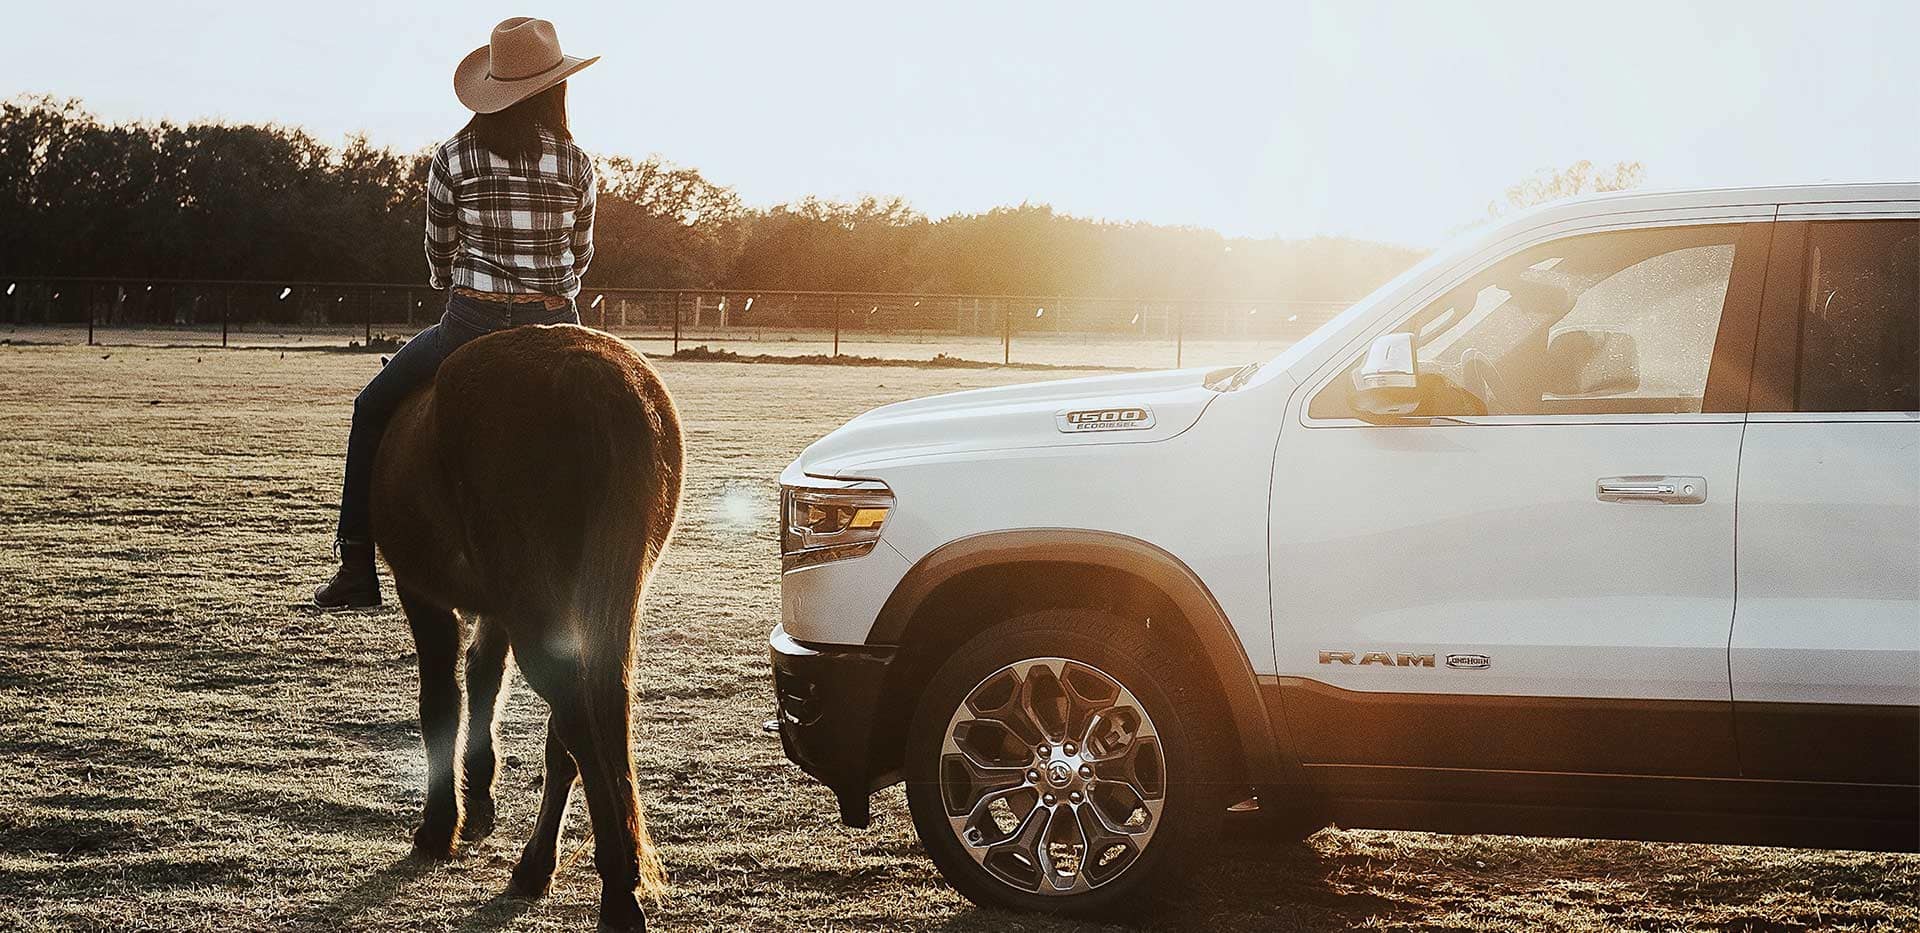 Display A 2022 Ram 1500 parked in a paddock with a woman on a horse beside it.